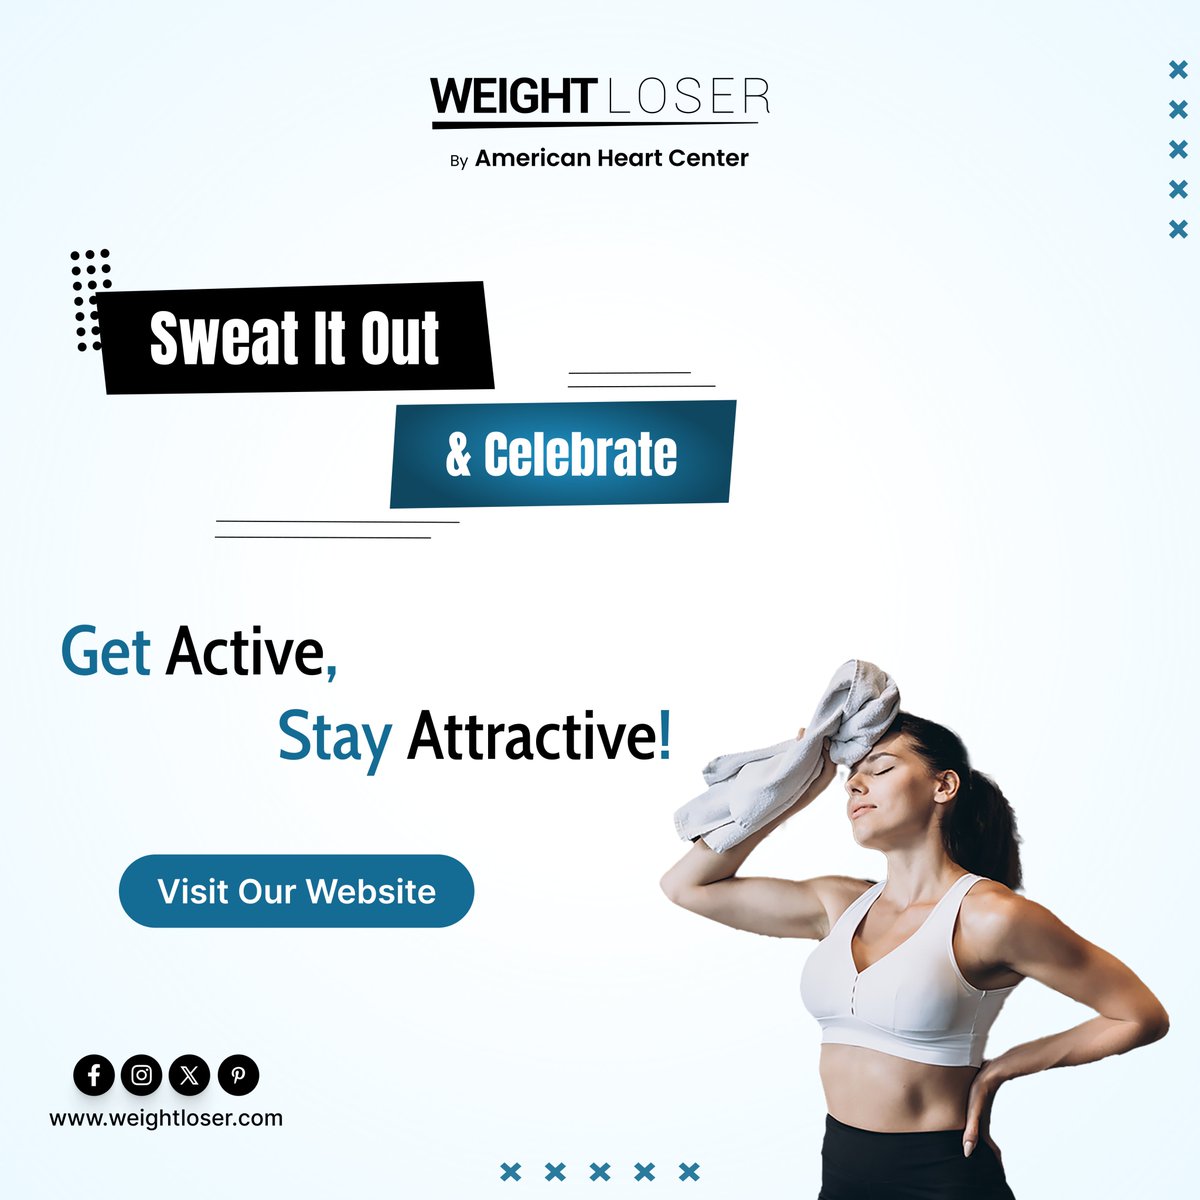 Turn exercise into enjoyment with WeightLoser! 💪Burn calories, boost metabolism, and build muscle with categorized exercise plans.🏋️‍♀️Energize your Healthy Weight Week with our tips.
Visit our website weightloser.com  for 50% off!🎉

#metabolismboost #weightloss #eat #GOAT